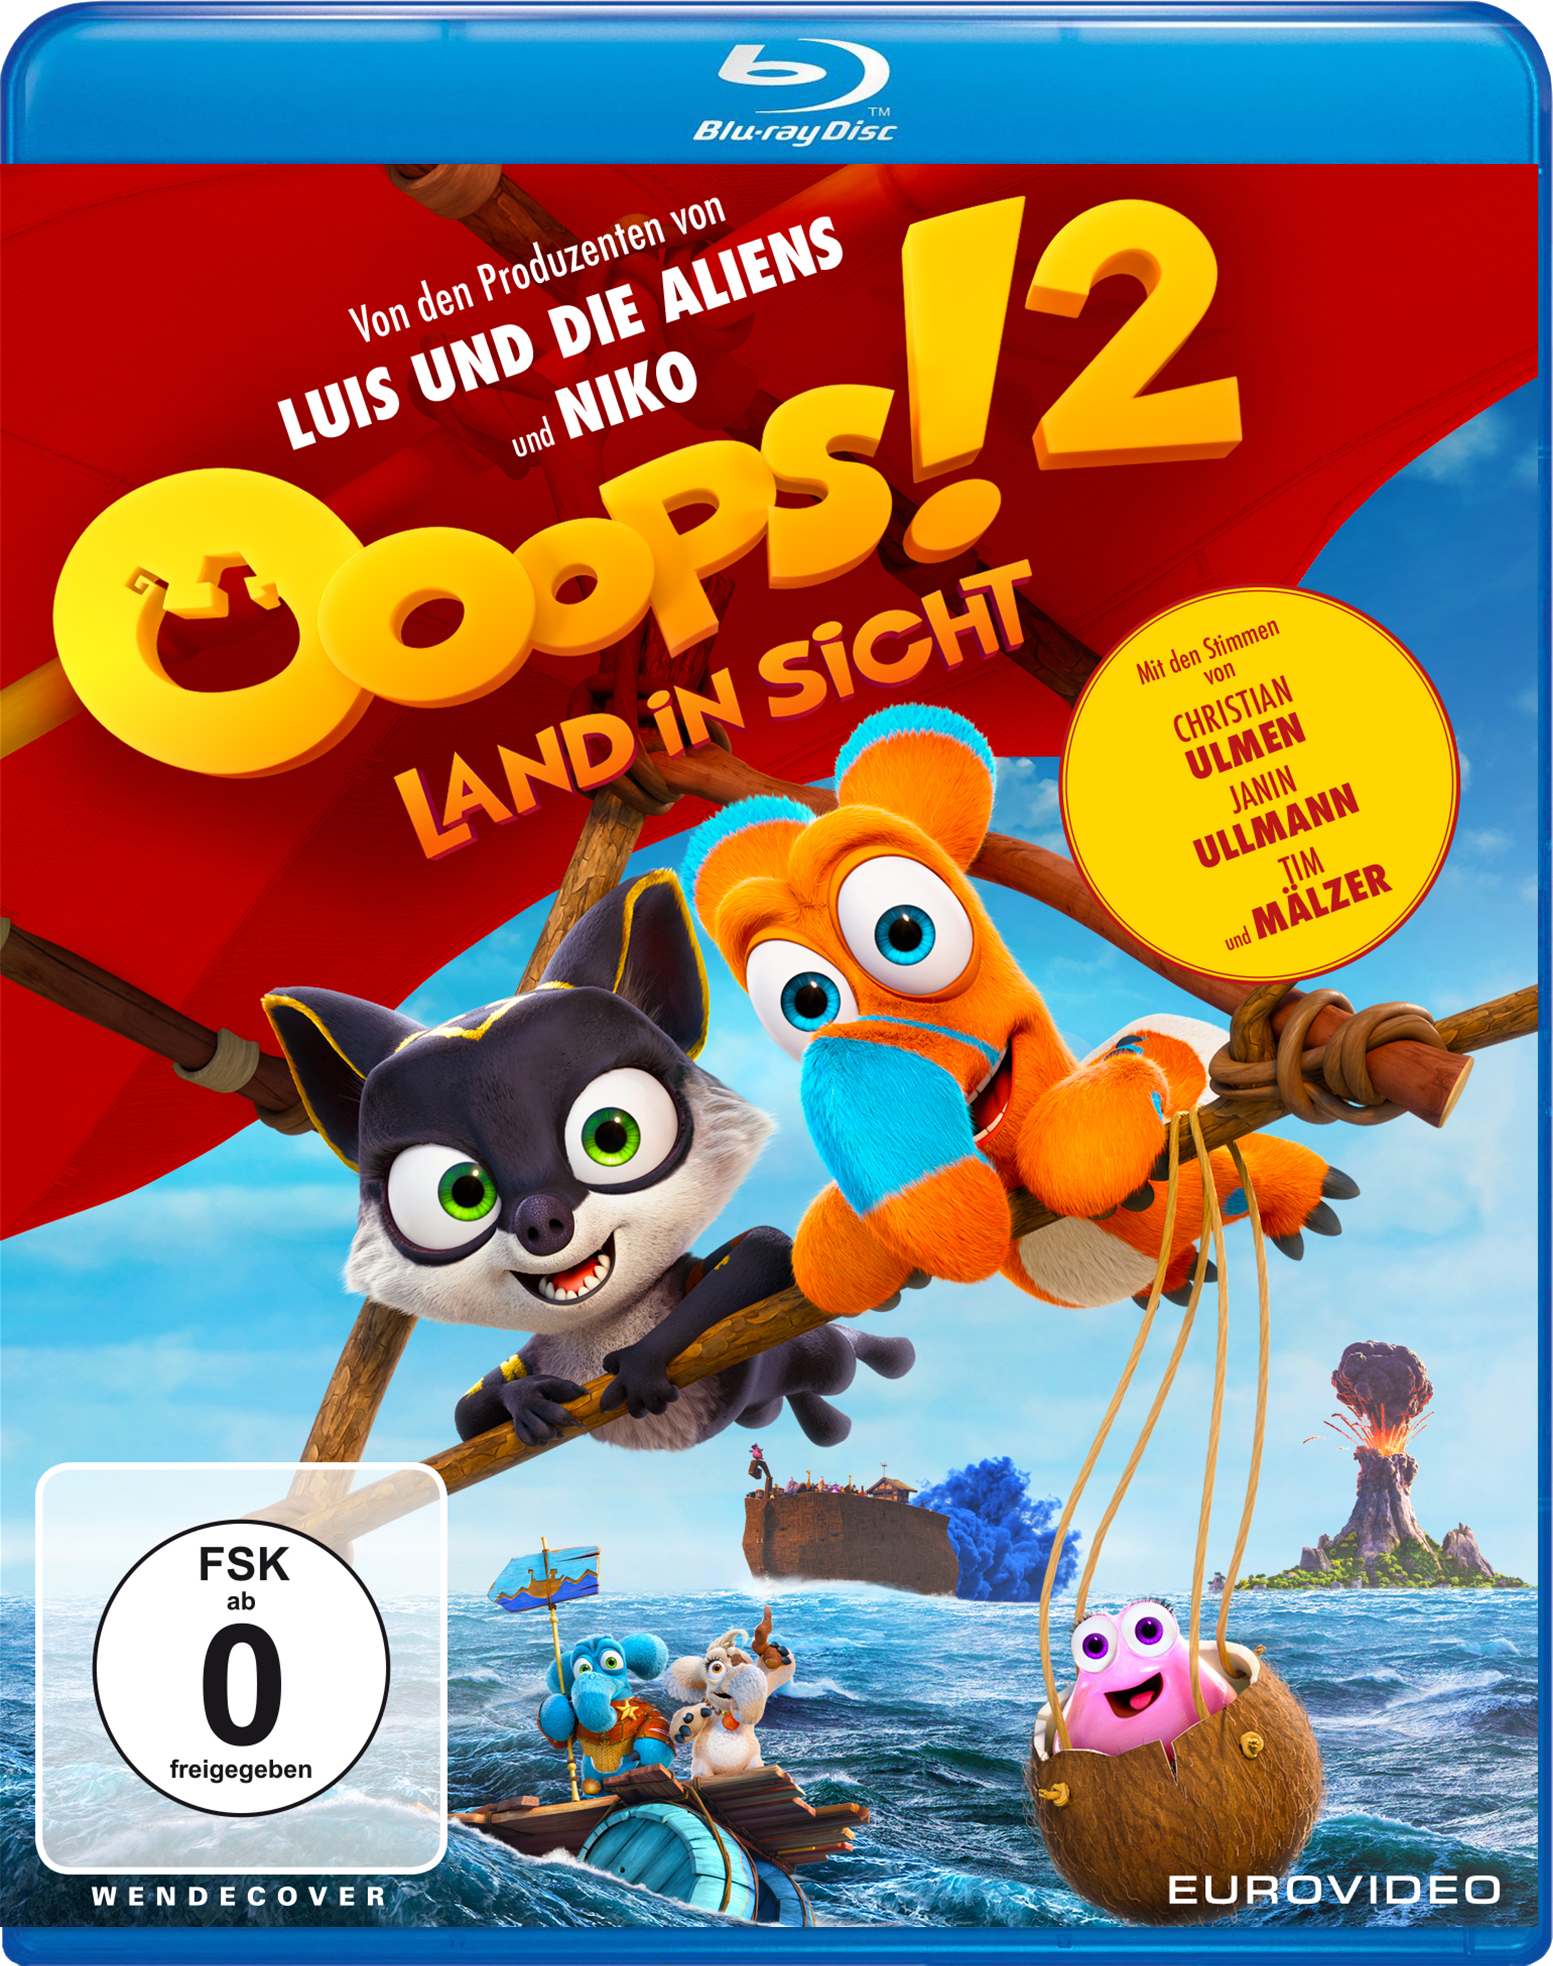 in 2 - Ooops! Land Sicht Blu-ray